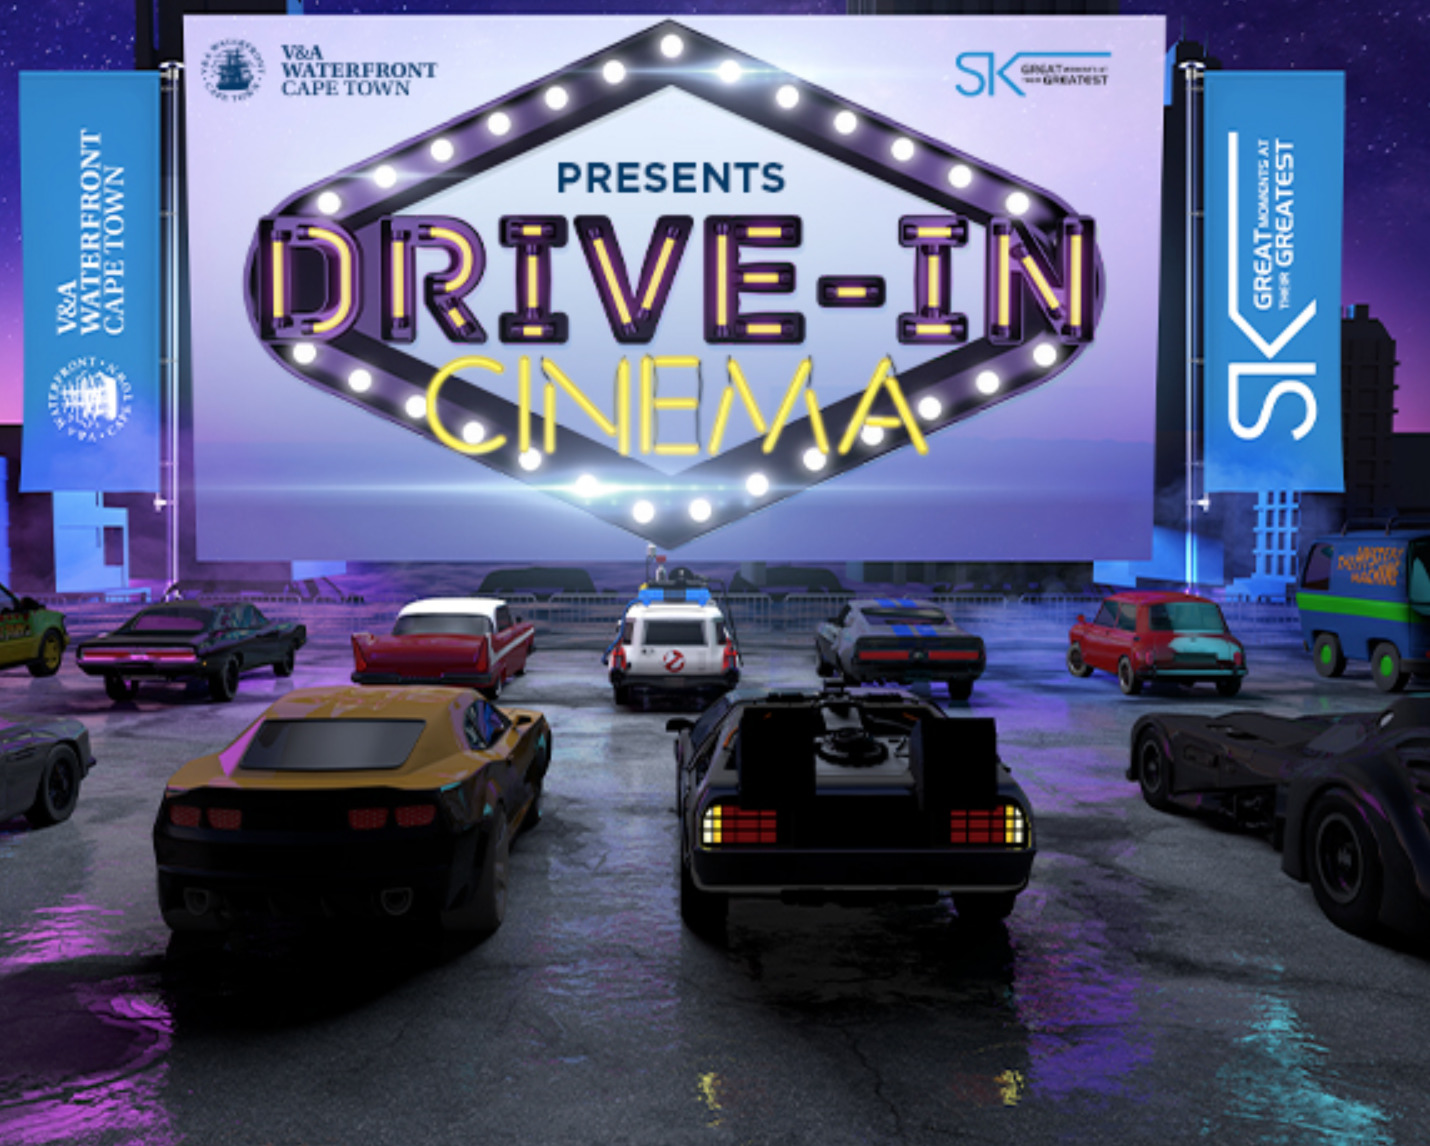 V&a Waterfront And Ster Kinekor Launch A Drive-in Experience photo